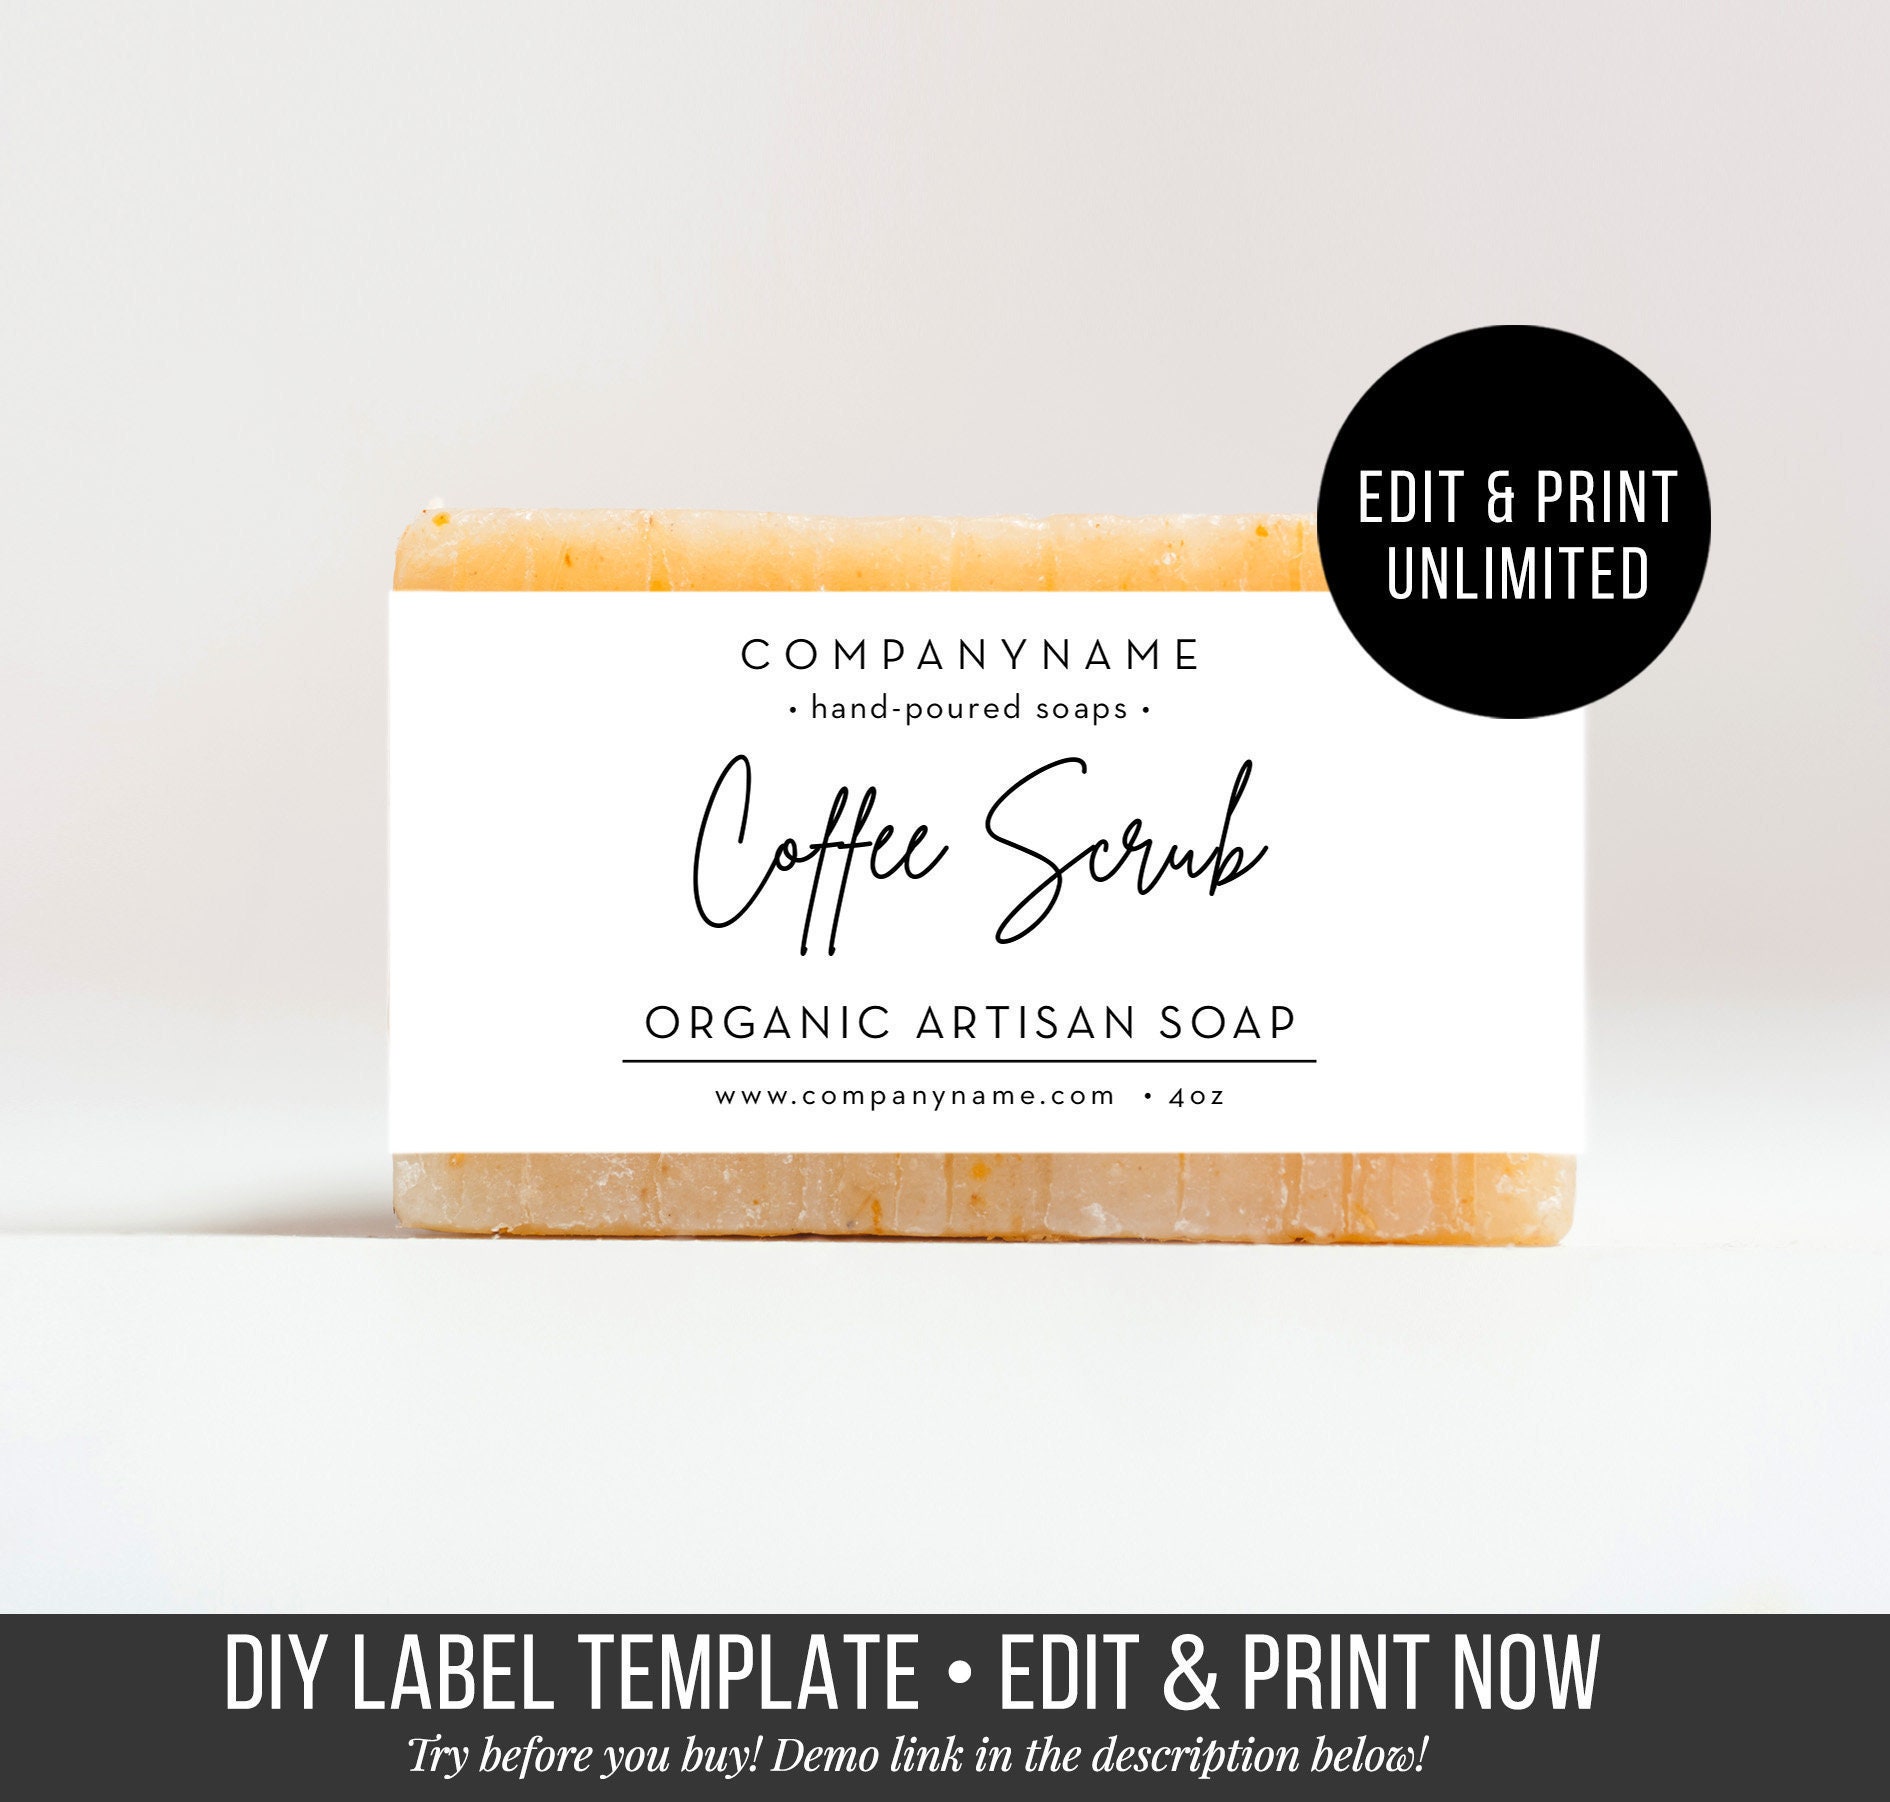 Custom Soap Label Template - DIY Printable Soap Labels - Editable Label  Template - Stylish Soap Label Design - Templett 23"x 23.23" Intended For Free Printable Soap Label Templates